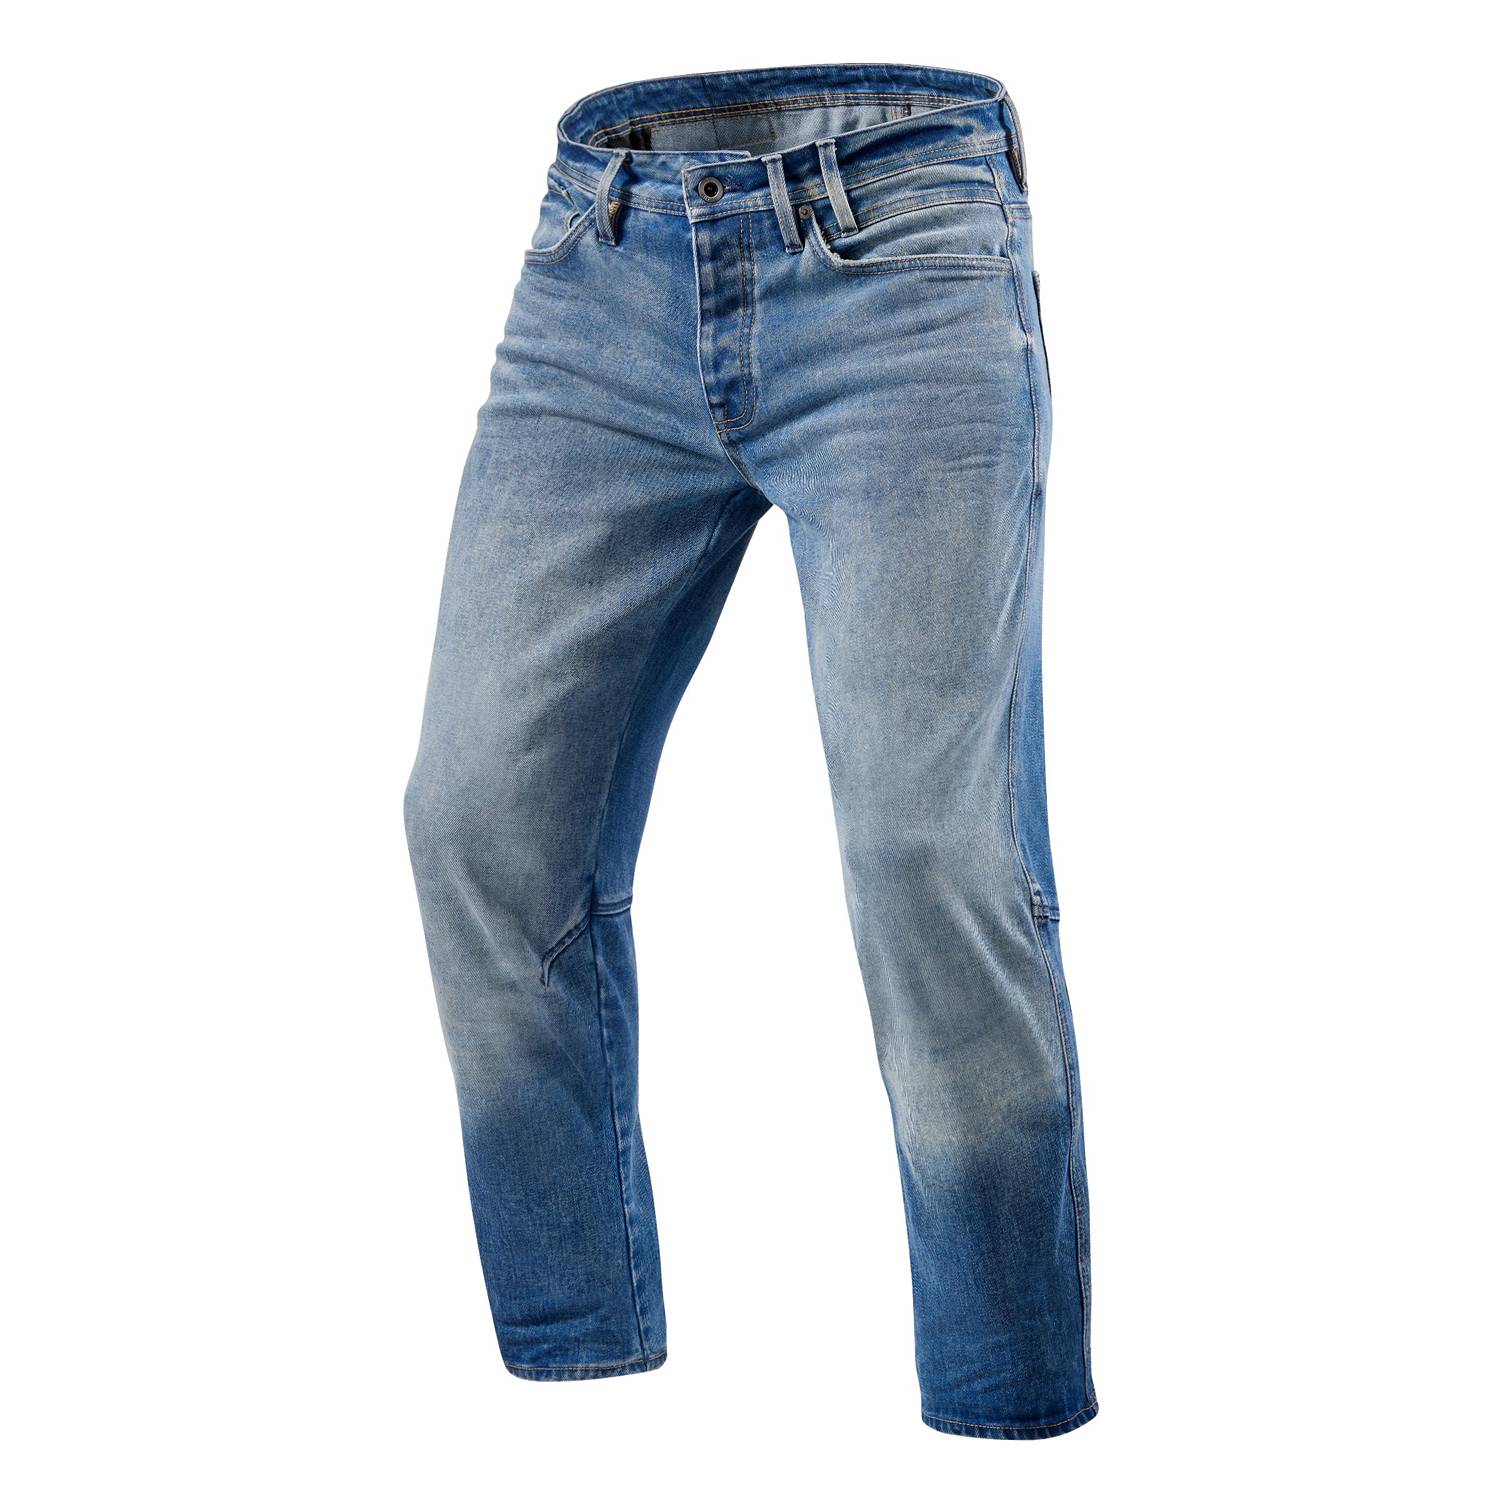 Image of REV'IT! Salt TF Mid Blue Used Motorcycle Jeans Talla L32/W30